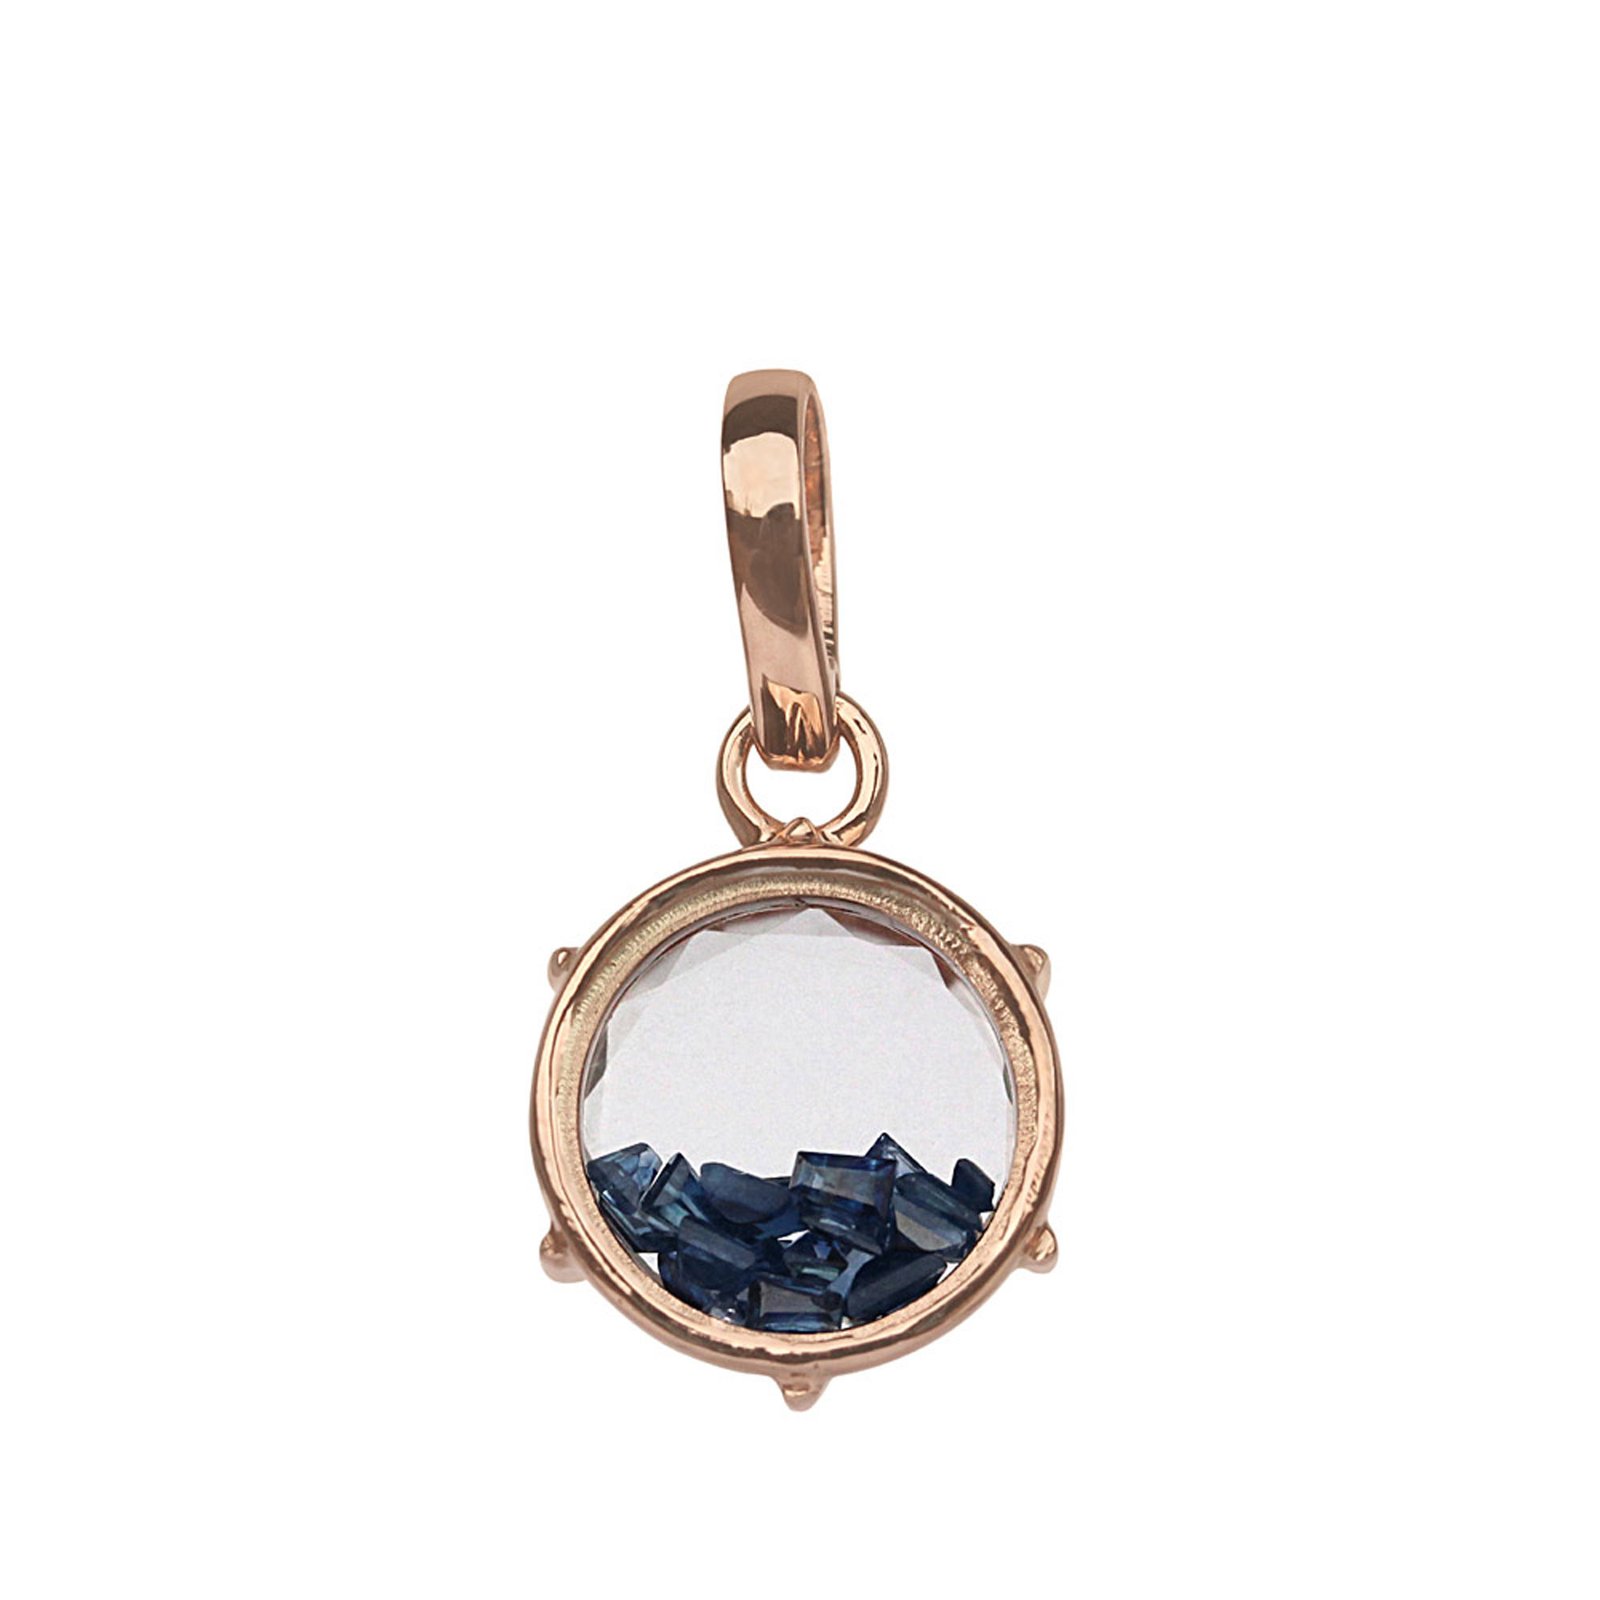 Solid 18k rose gold crystal shaker pendant with blue sapphire